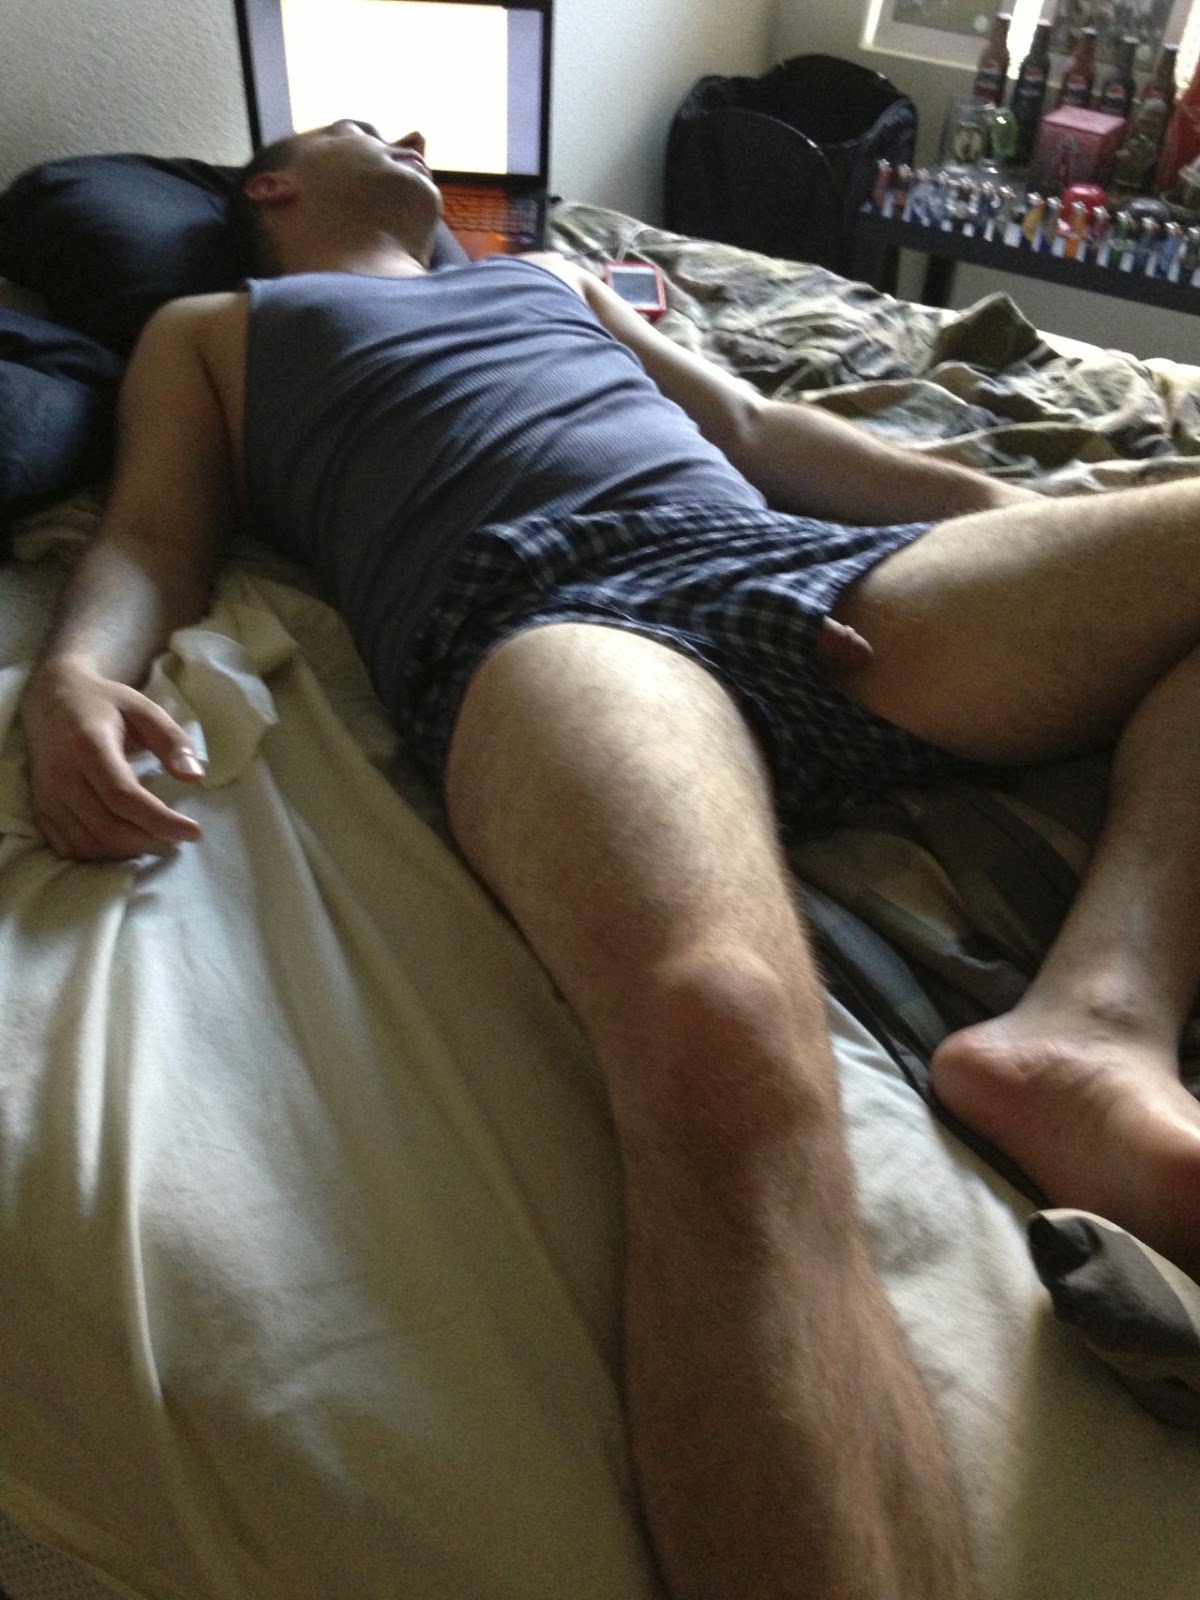 Dude caught sleeping cock out